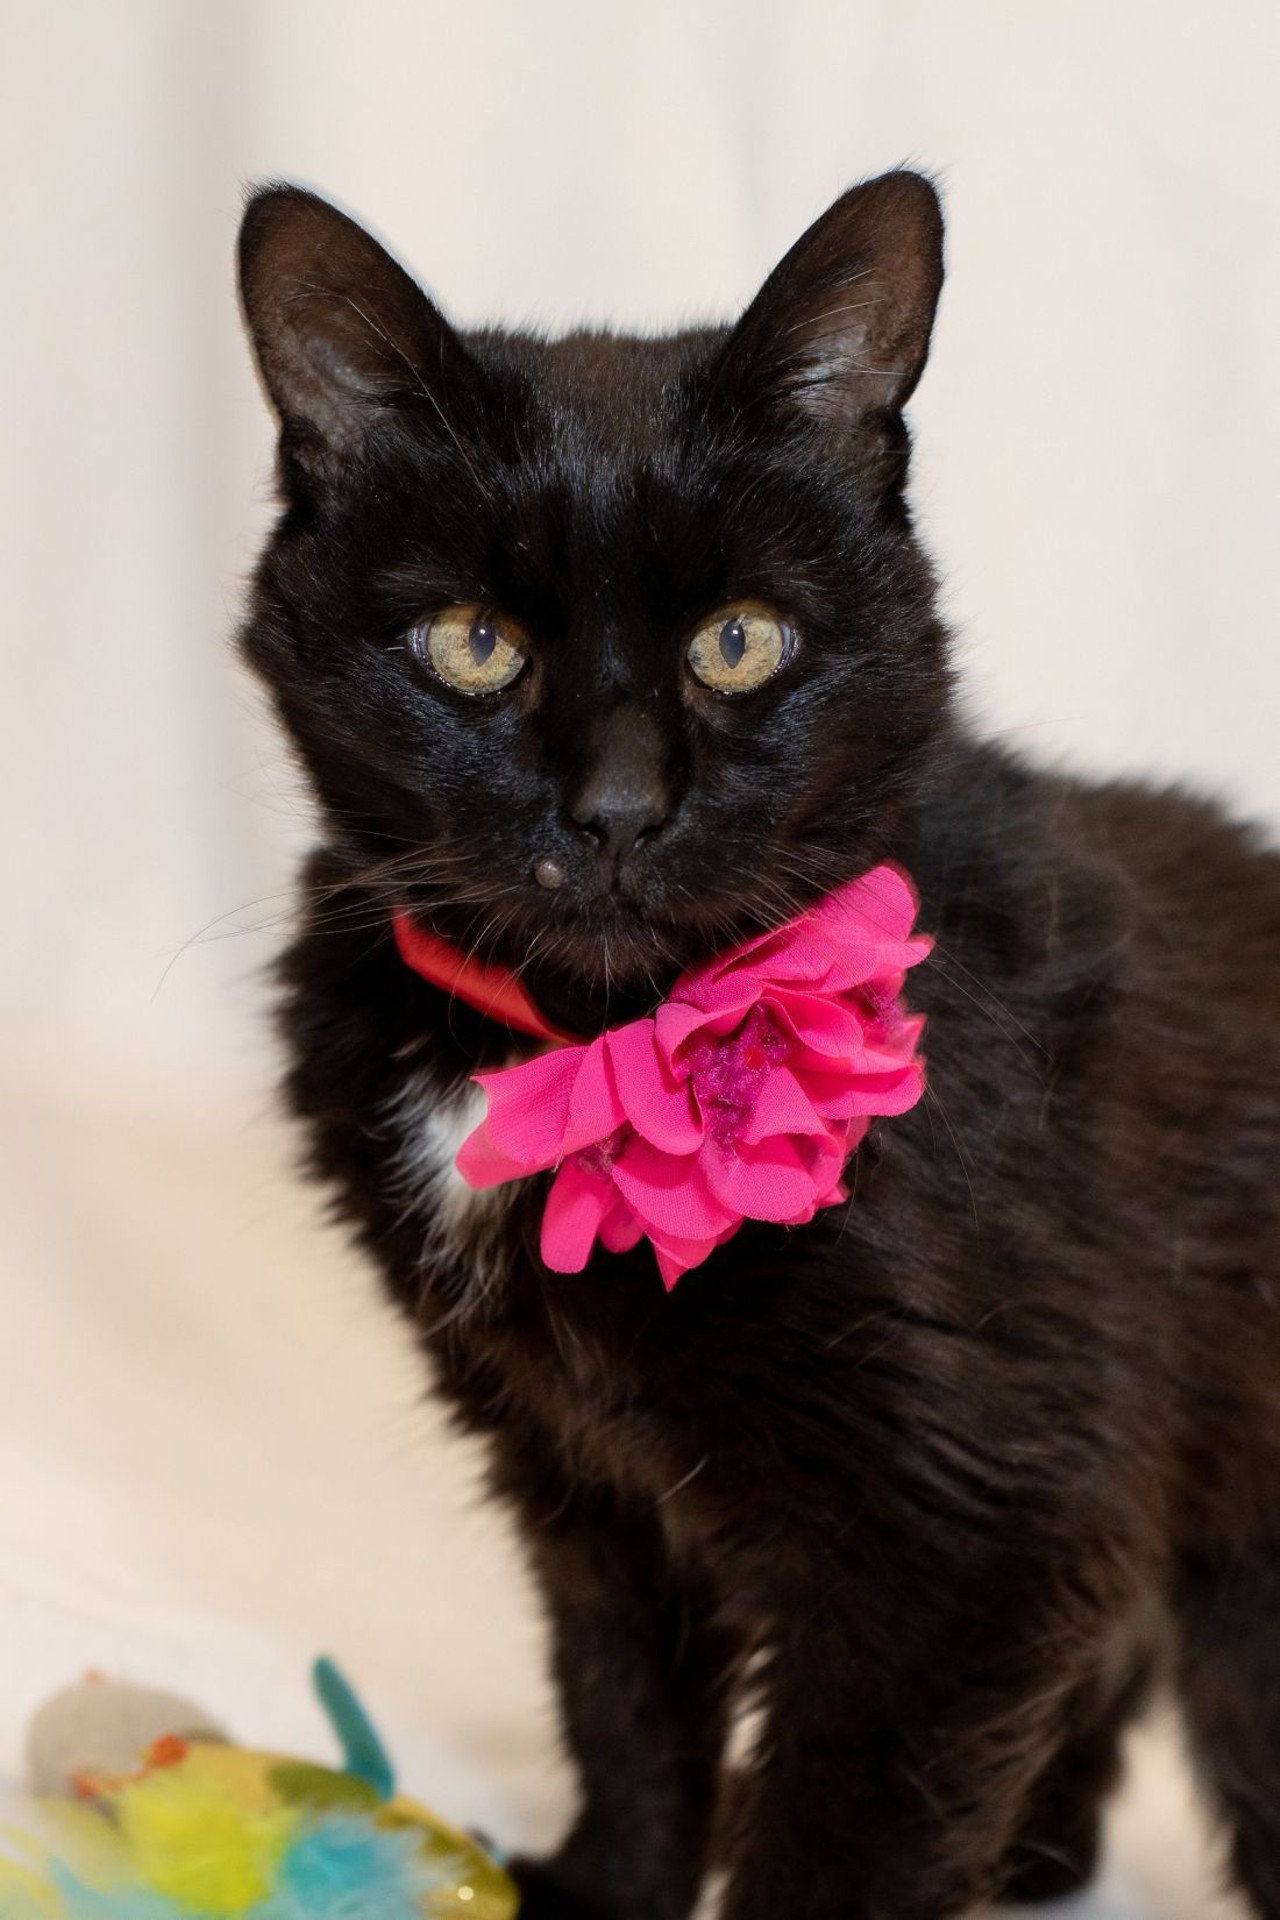 NAME: Picasso 
GENDER: Female
BREED: Domestic Short Hair
AGE: 5 years, 1 month
WEIGHT: 6 pounds
SPECIAL CONSIDERATIONS: Picasso is cross eyed and, thus, a little unsteady on her feet.
REASON I CAME TO MHS: Owner surrender
LOCATION: Petco of Sterling Heights
ID NUMBER: 870420